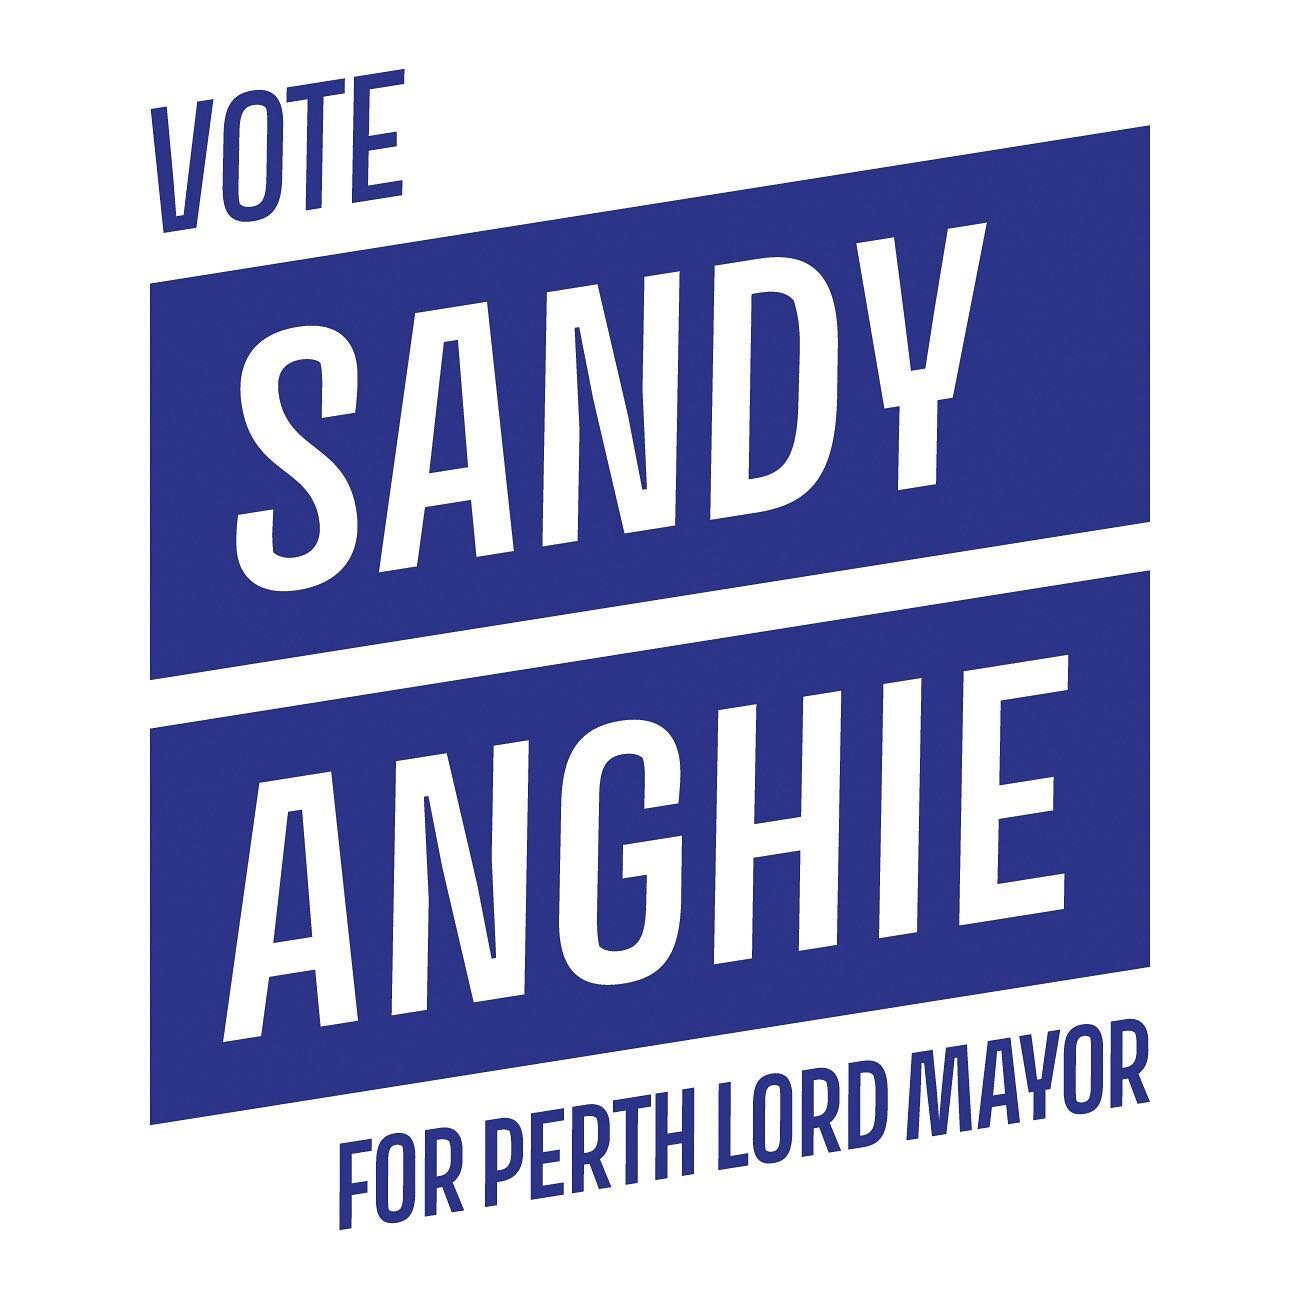 Campaign week 2 &hellip; 

Every day I am focused on delivering for the City of Perth, through my role as city Councillor and other initiatives I am involved in. Making Perth a world class liveable city is what gets me up every morning. 

To have you